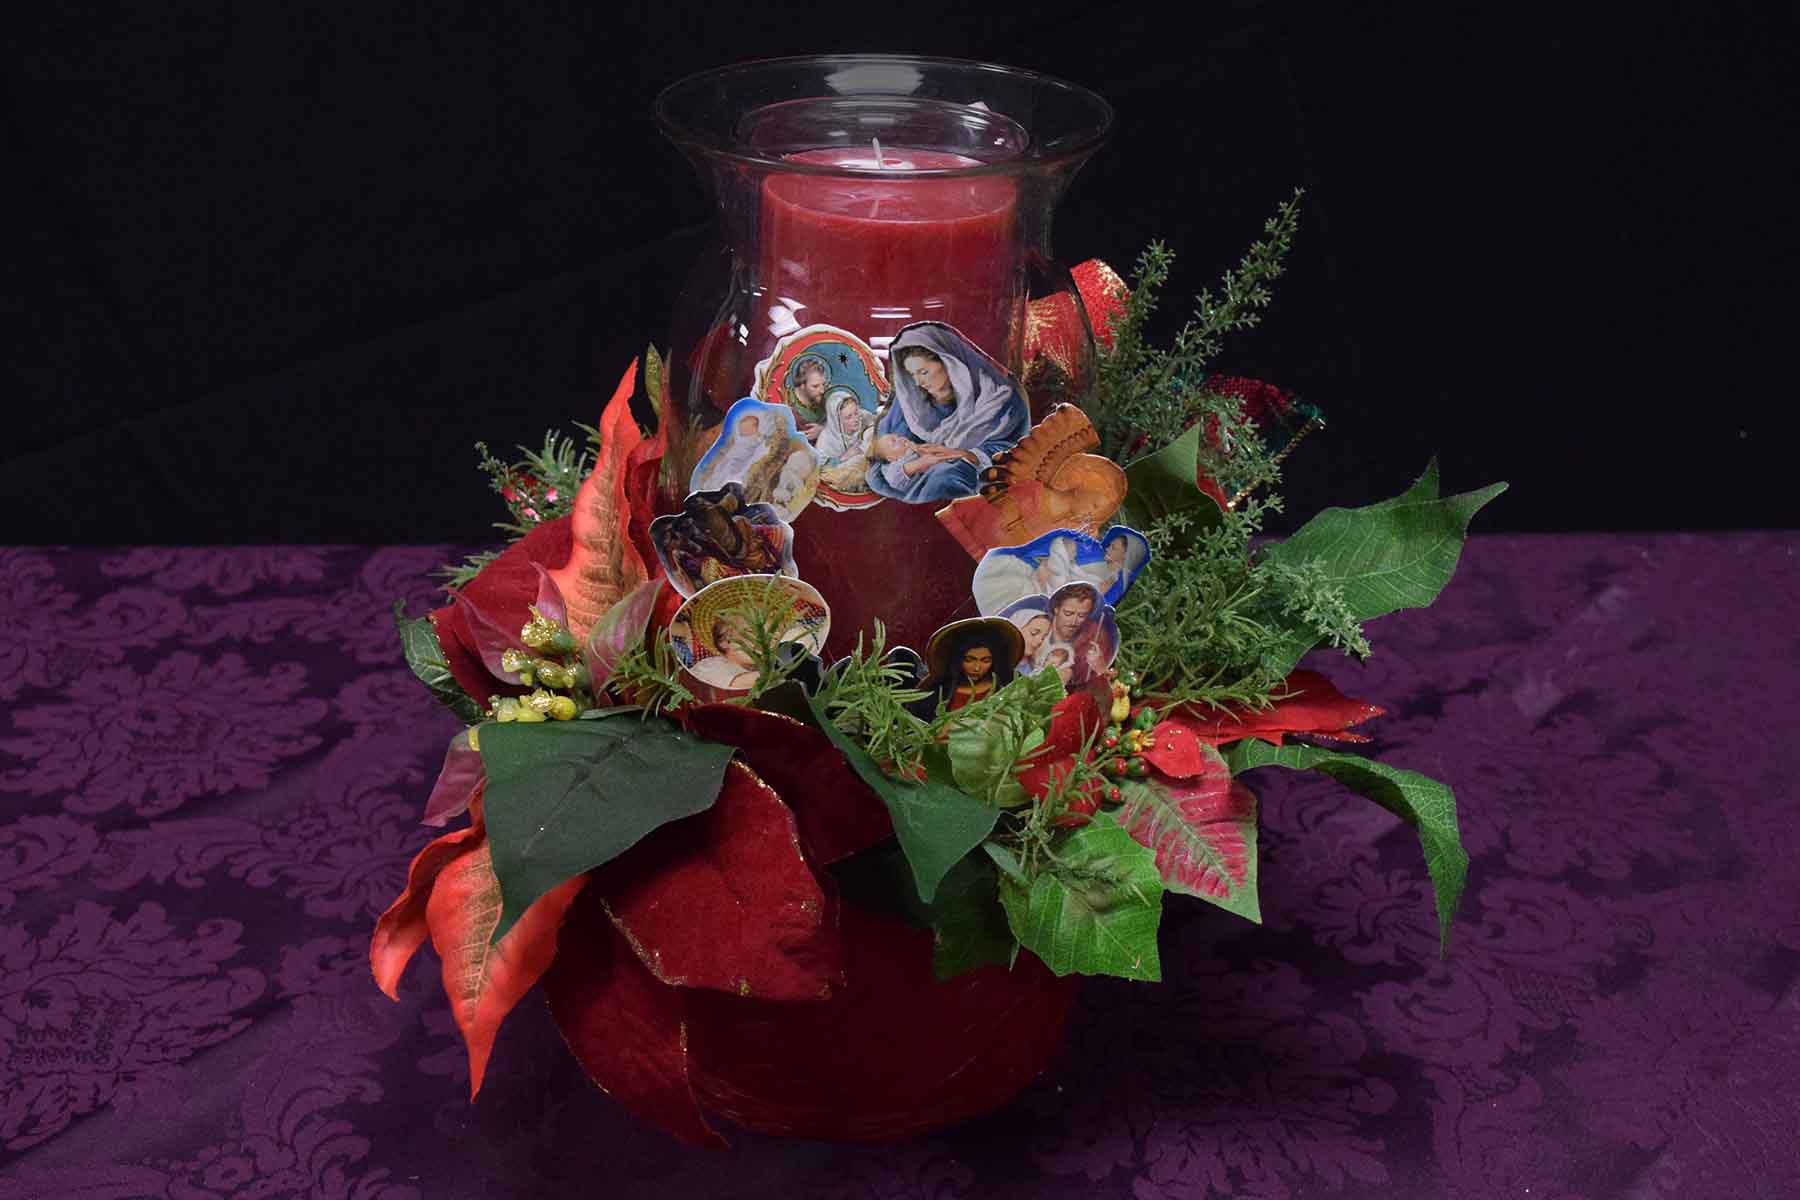 C14_--_Red_candle_in_hurricane_with_paper_wreath.jpg